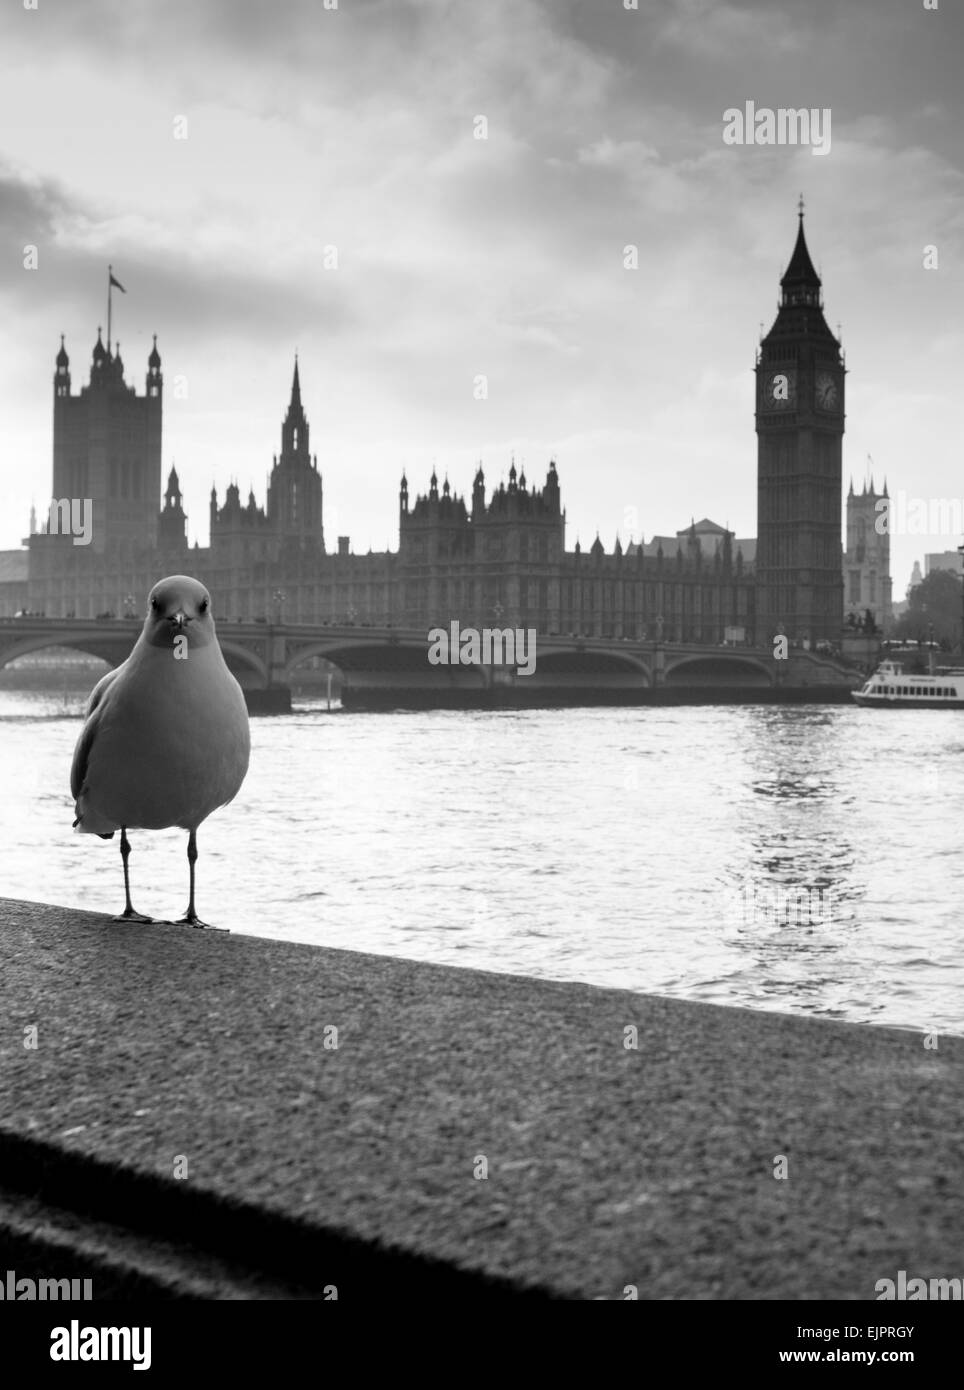 London. Westminster Bridge and Houses of Parliament. Bird on foreground Stock Photo